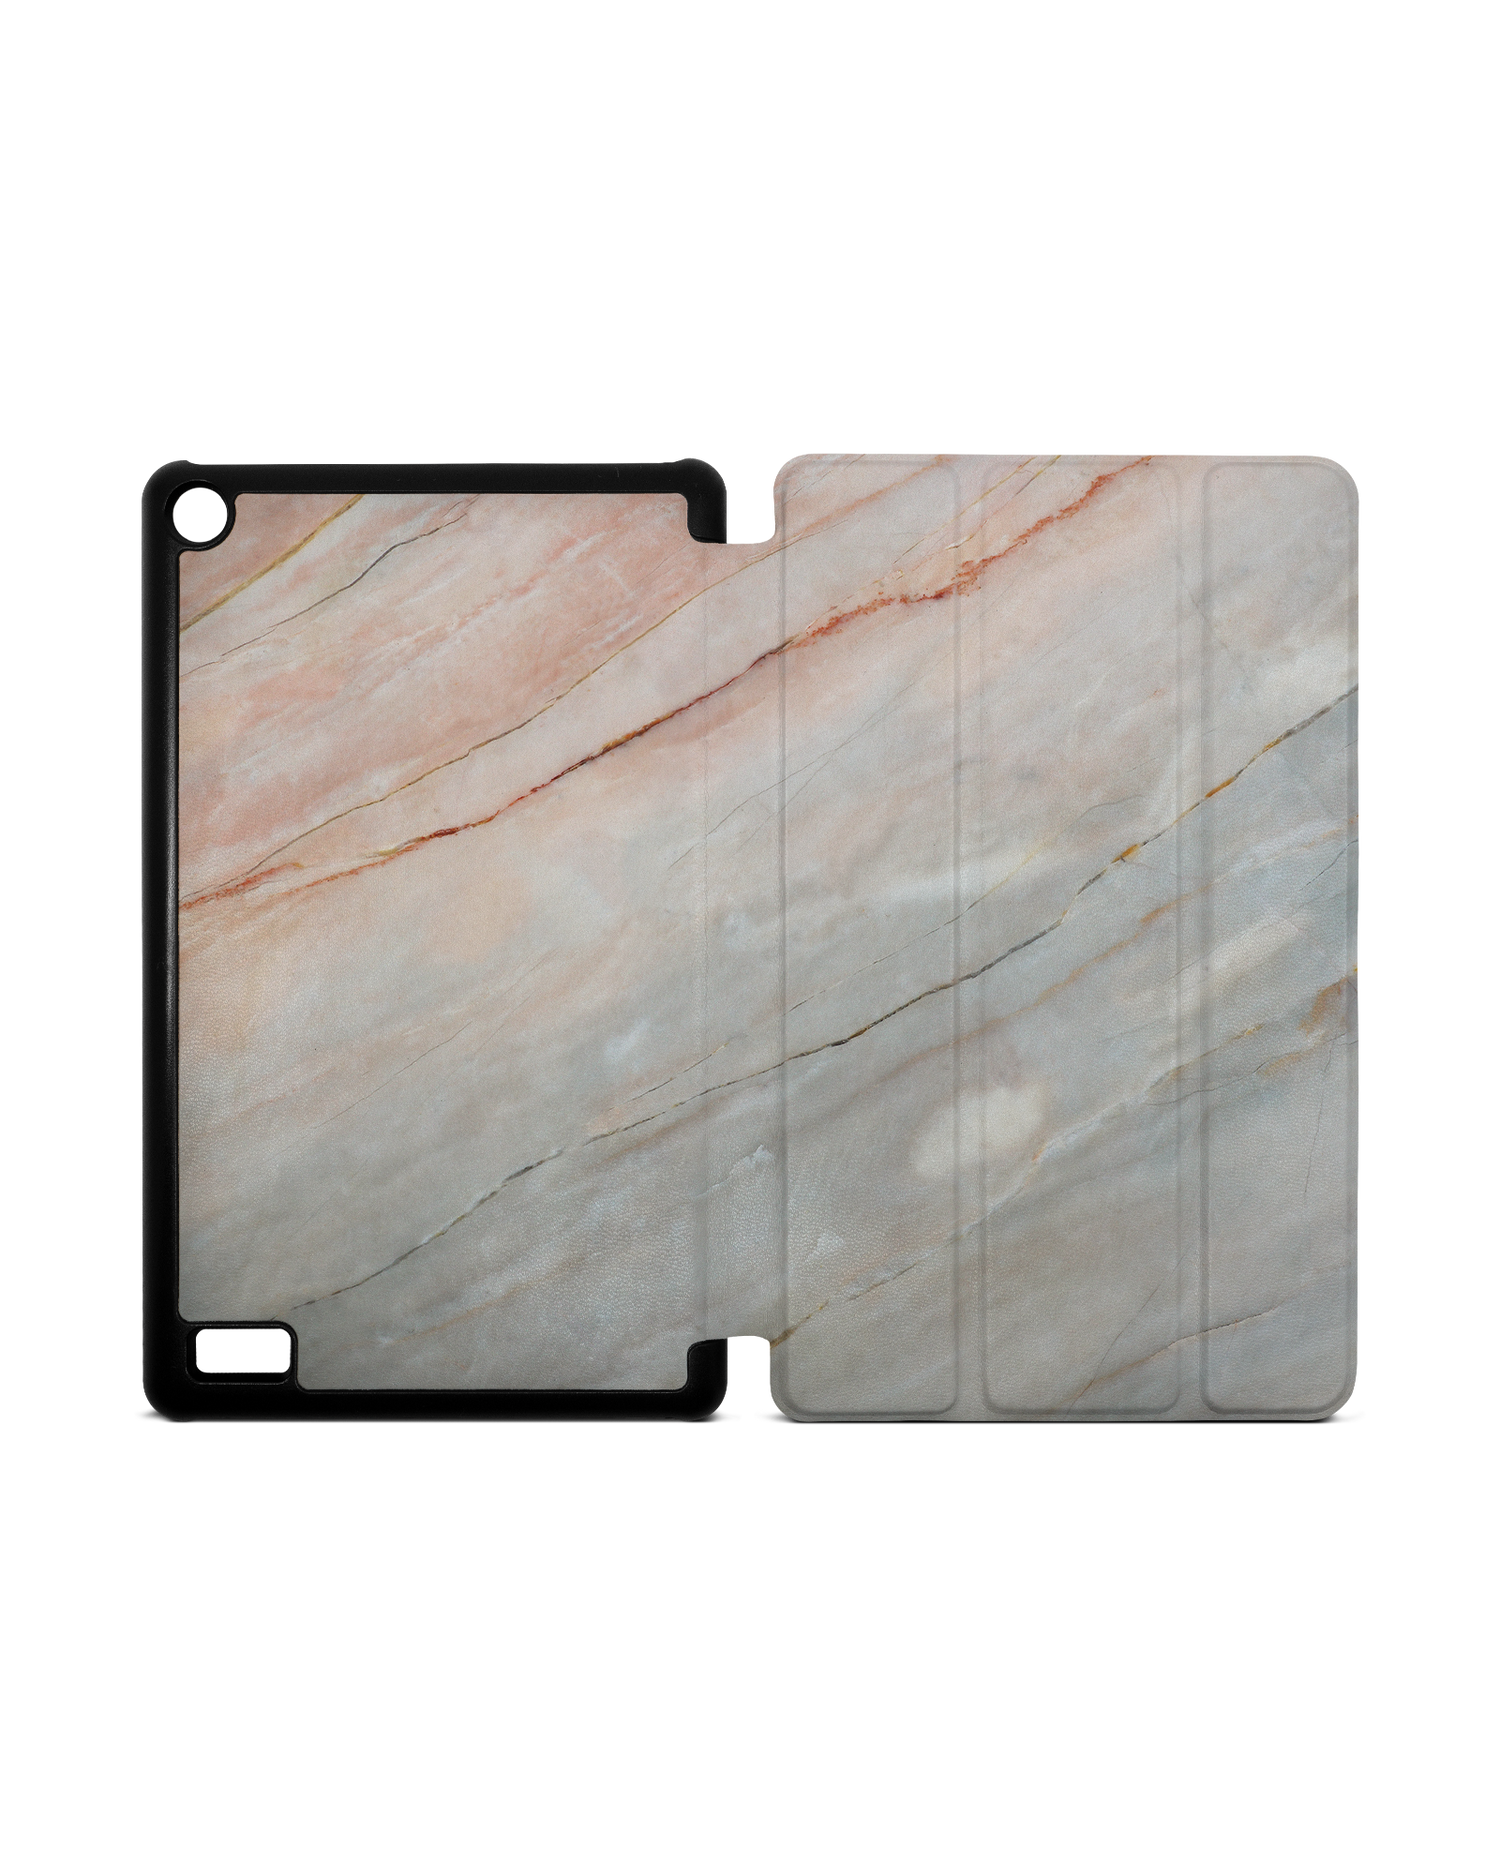 Mother of Pearl Marble Tablet Smart Case for Amazon Fire 7: Opened